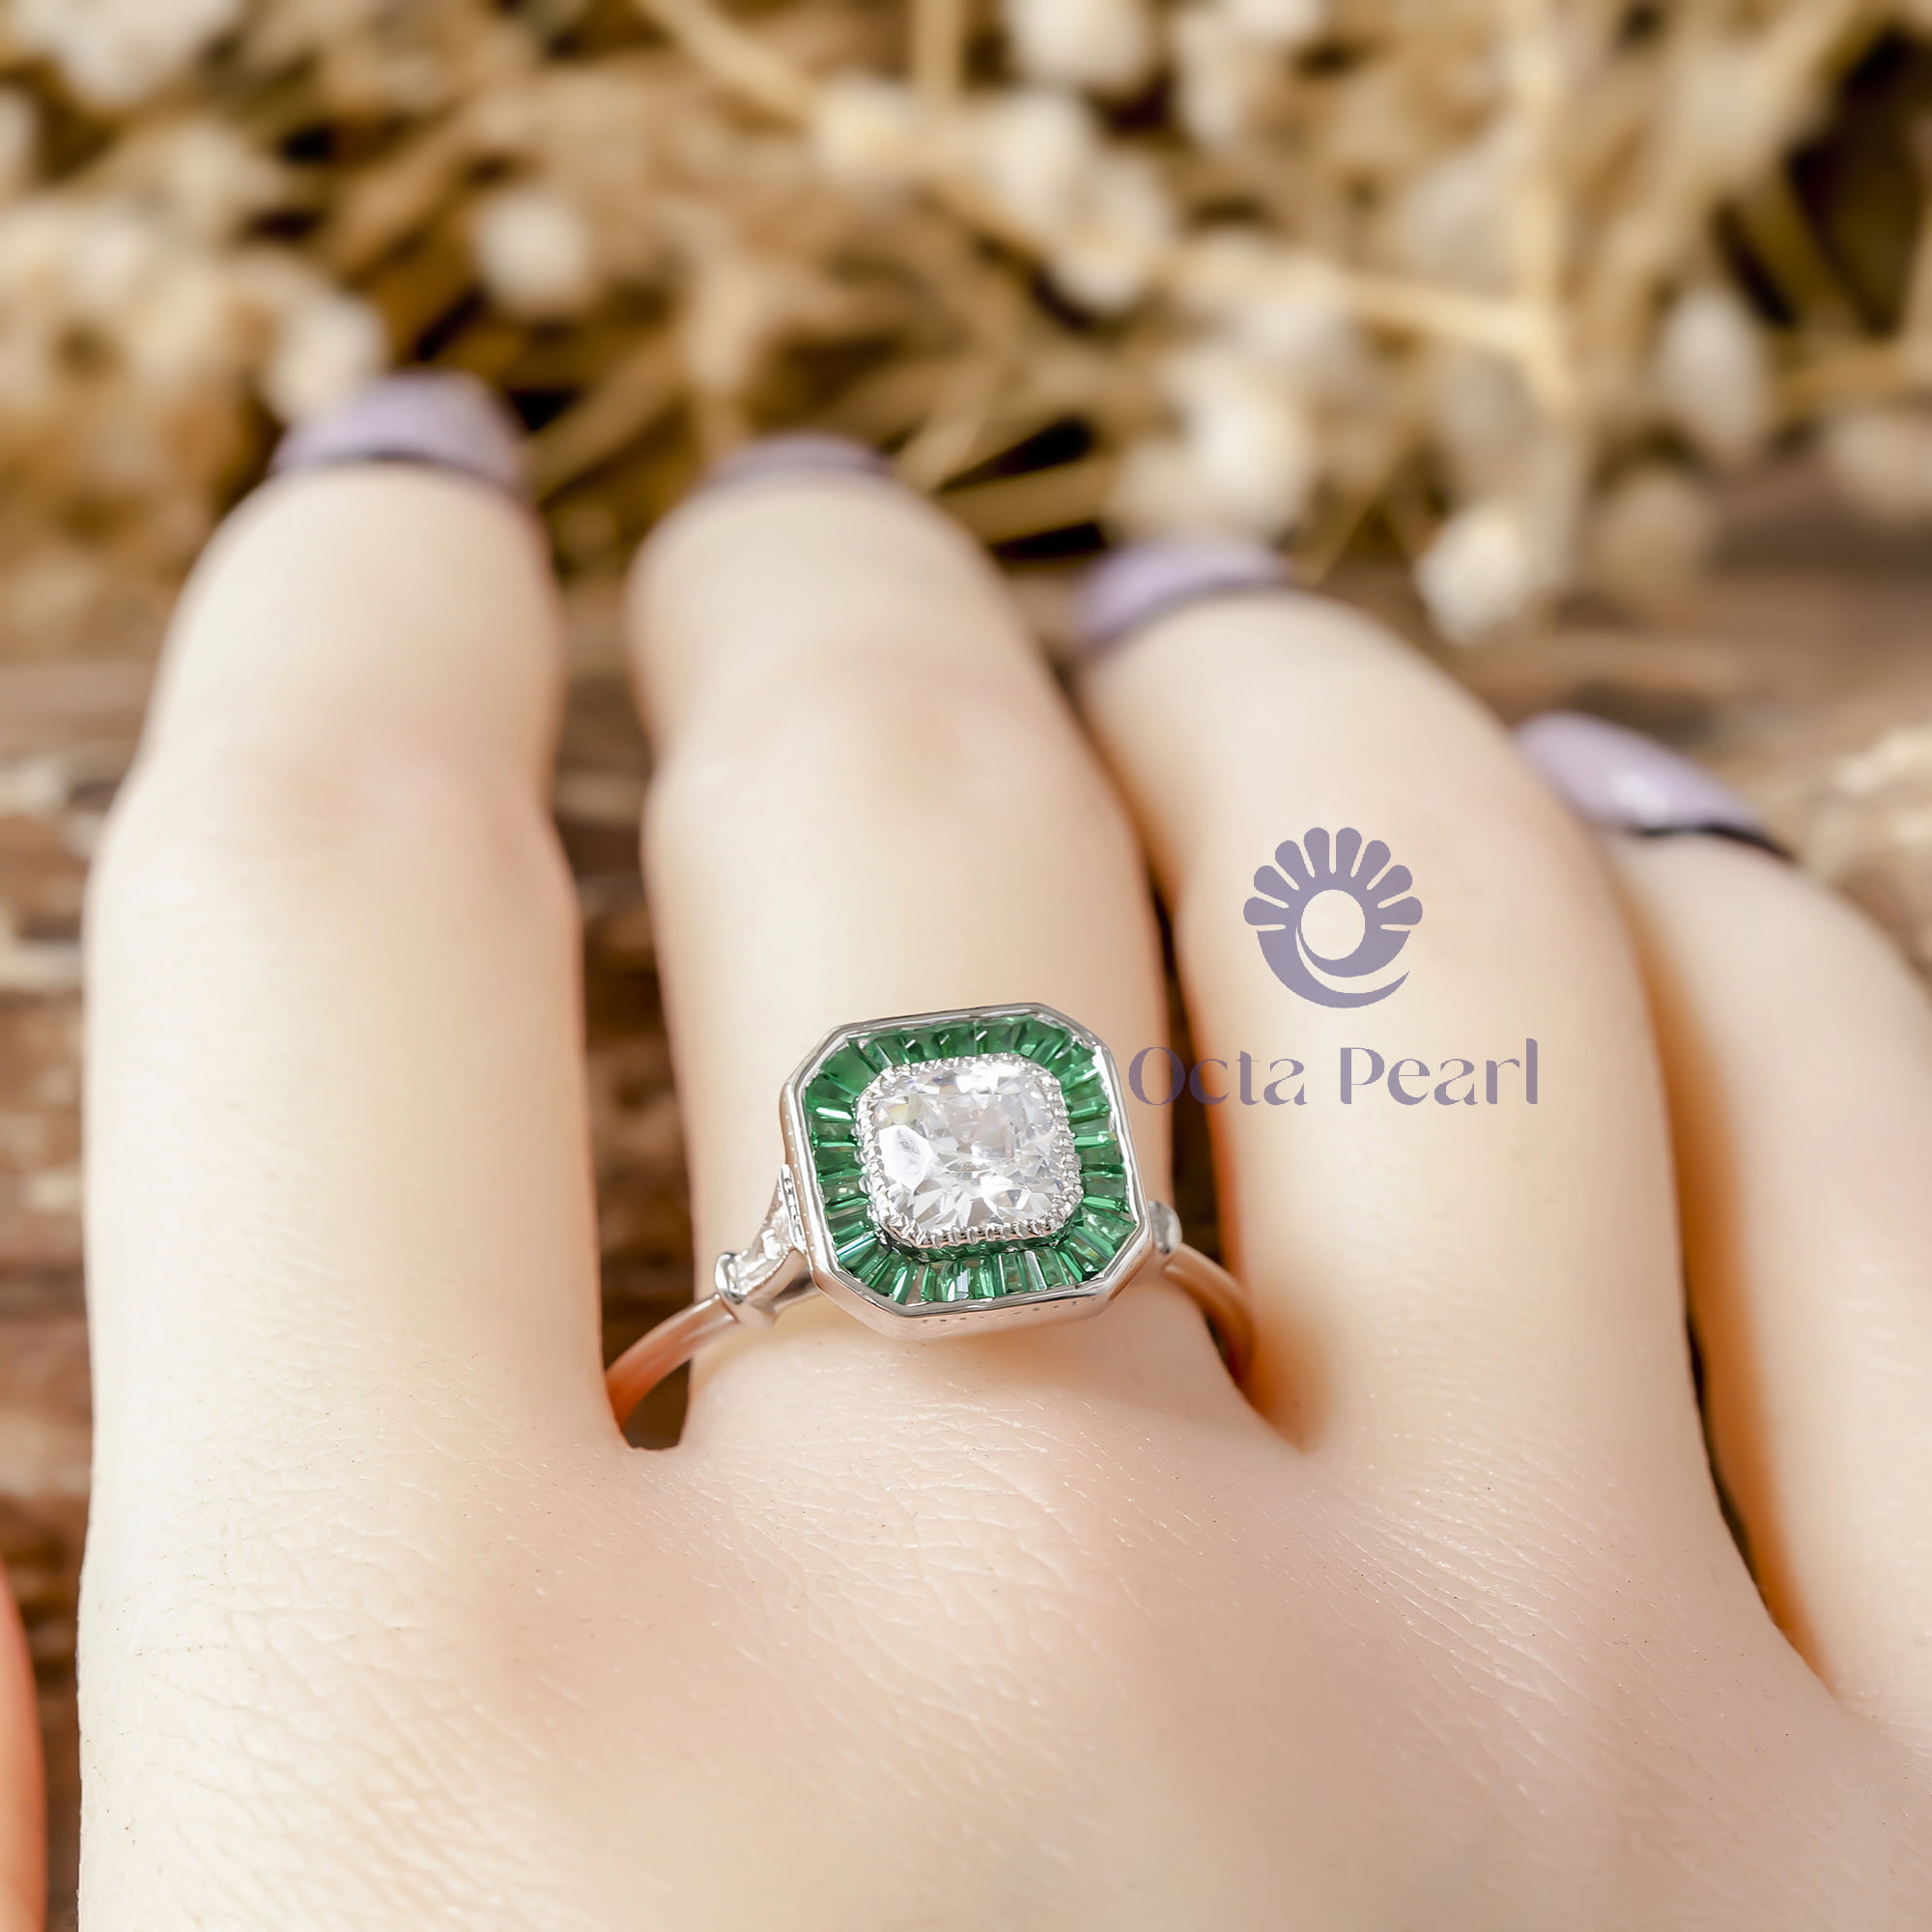 Old Mine Cushion Cut With Green Baguette CZ Stone Halo Vintage Look Target Ring